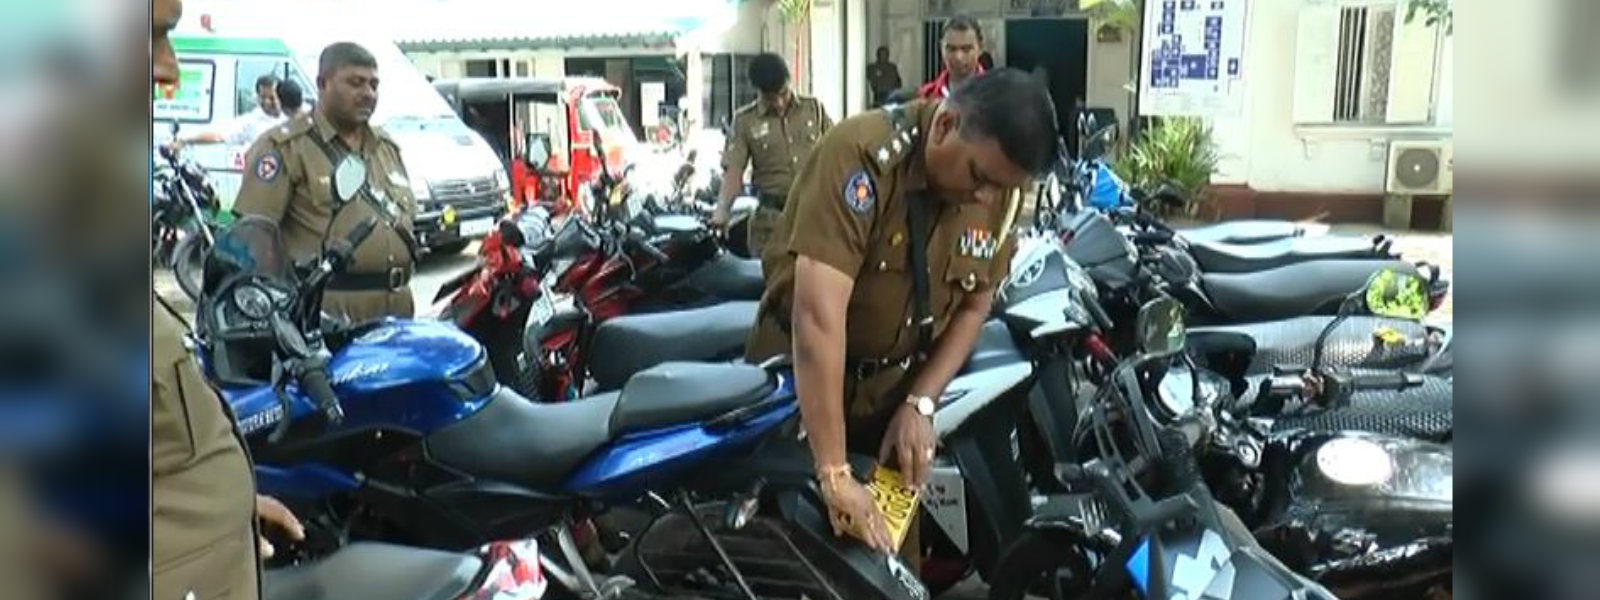 32 bike riders arrested for irresponsible riding 